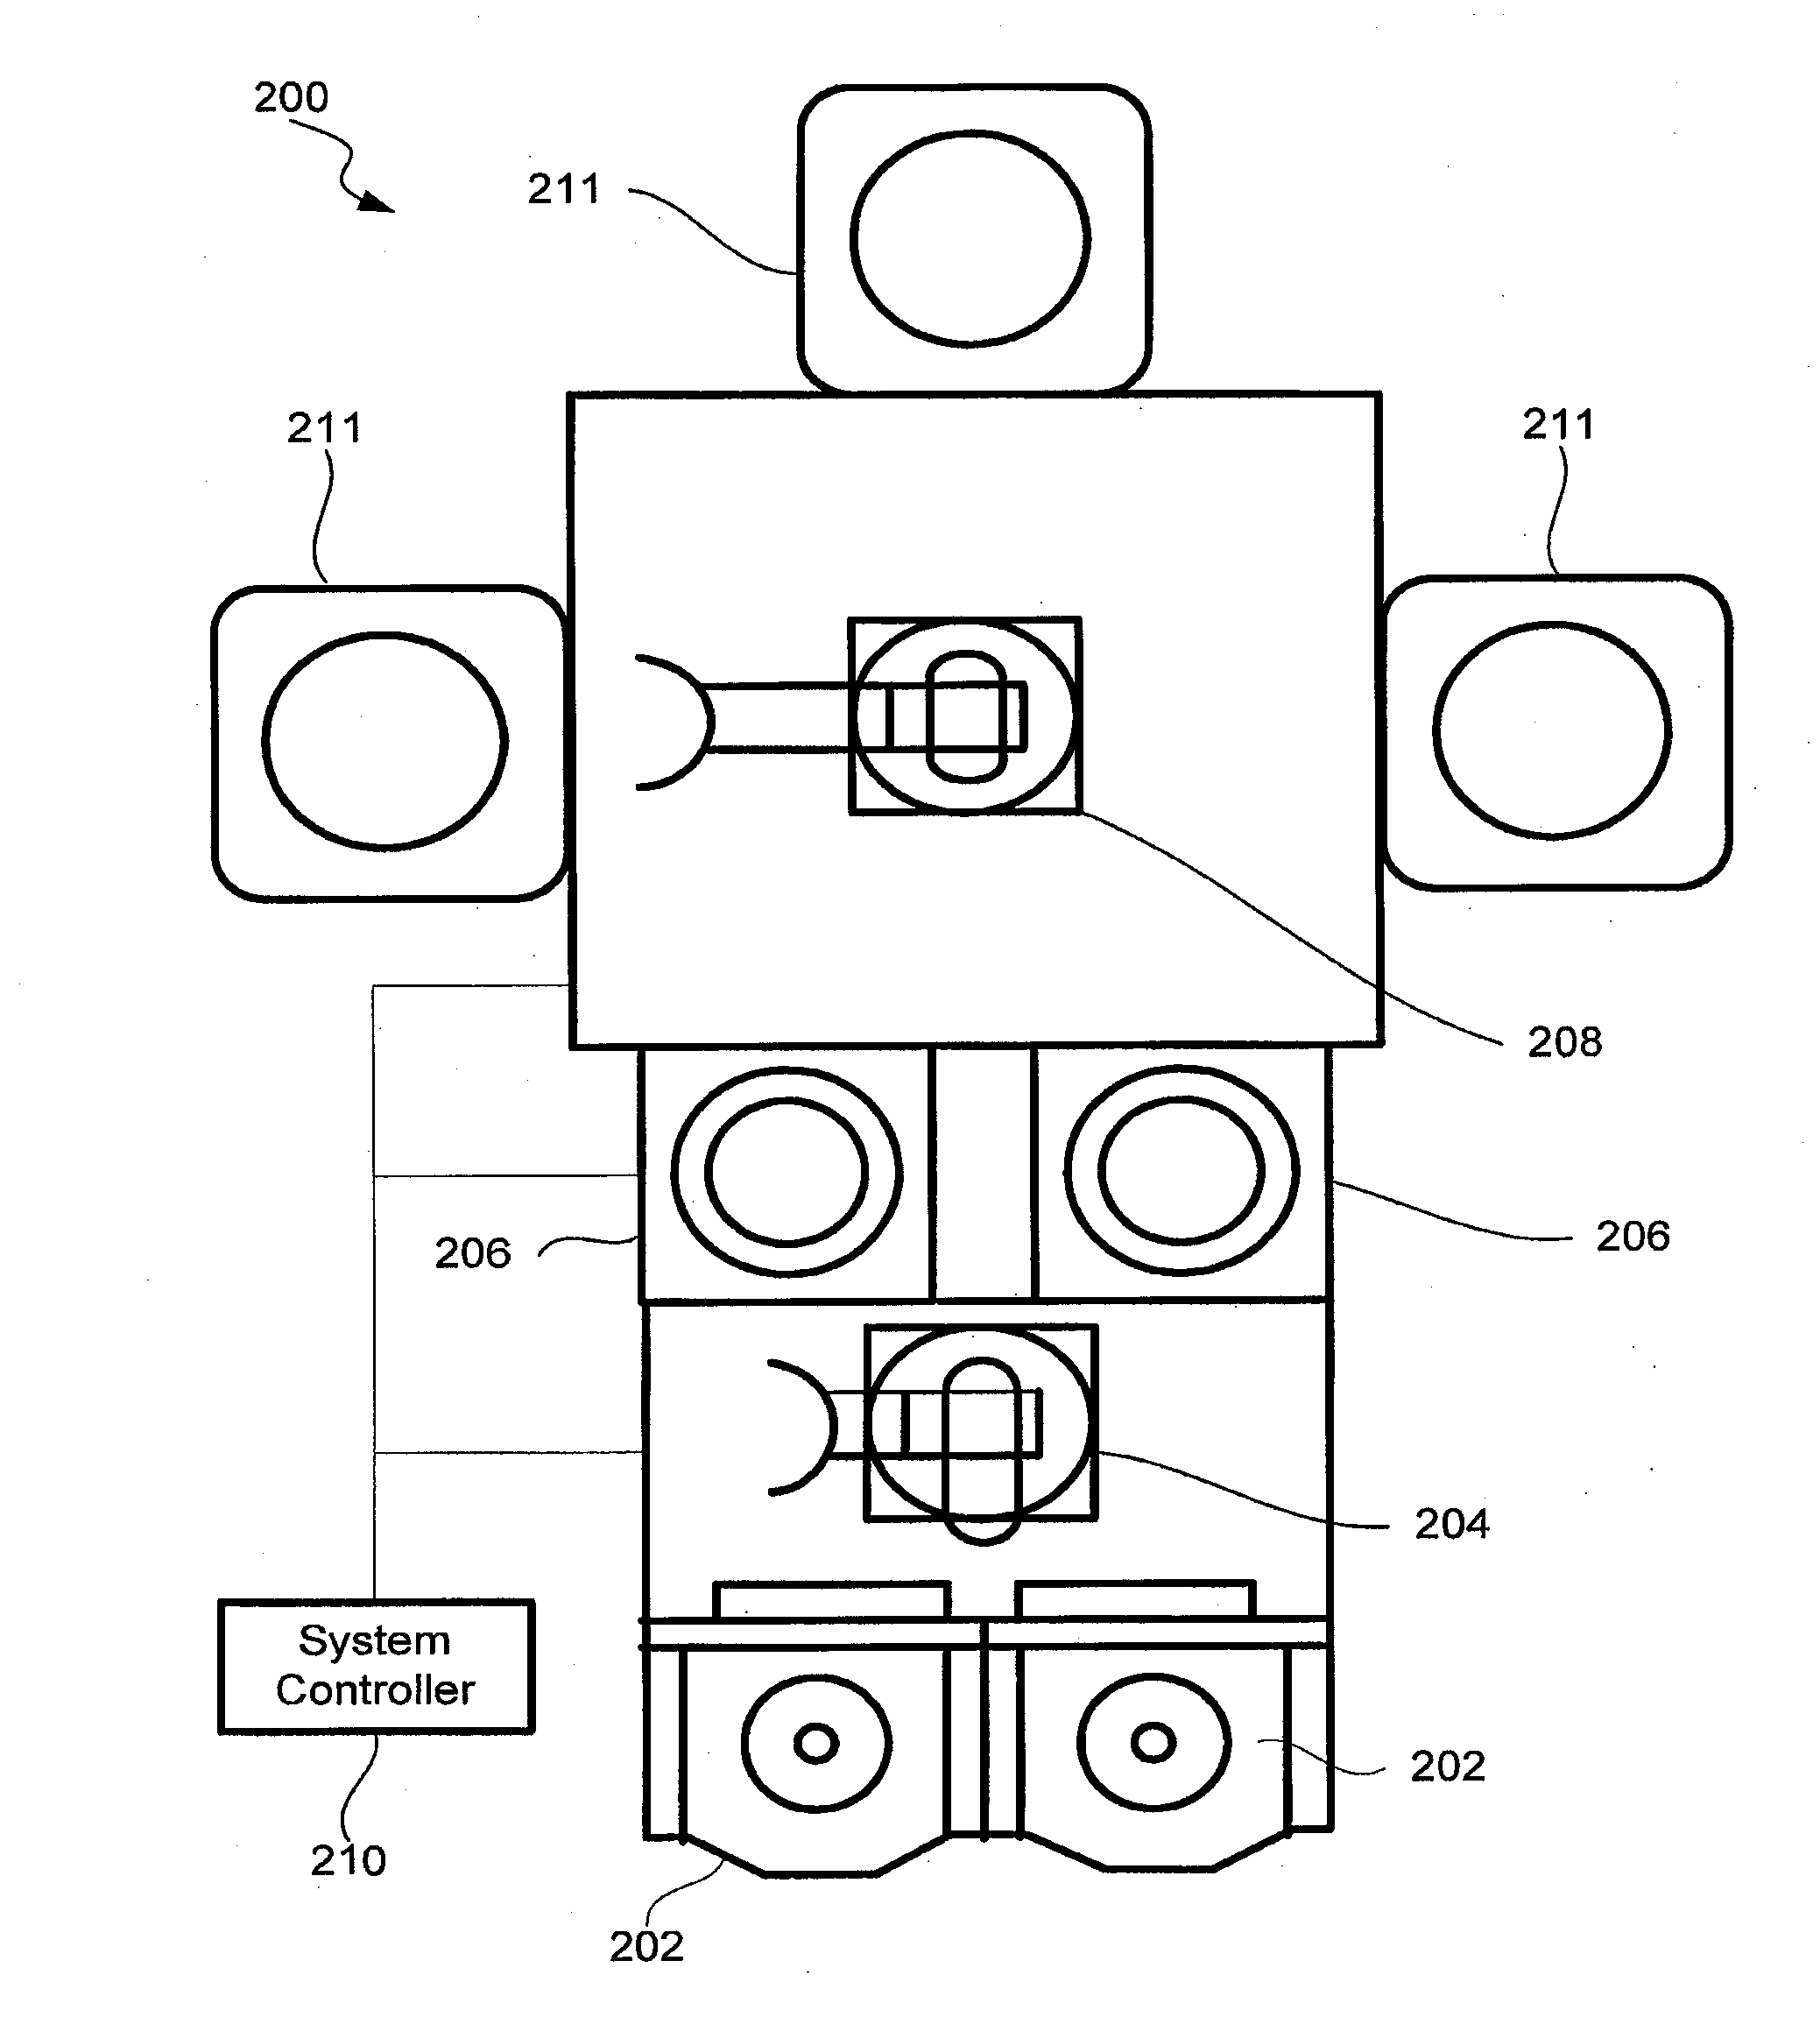 Minimum contact area wafer clamping with gas flow for rapid wafer cooling